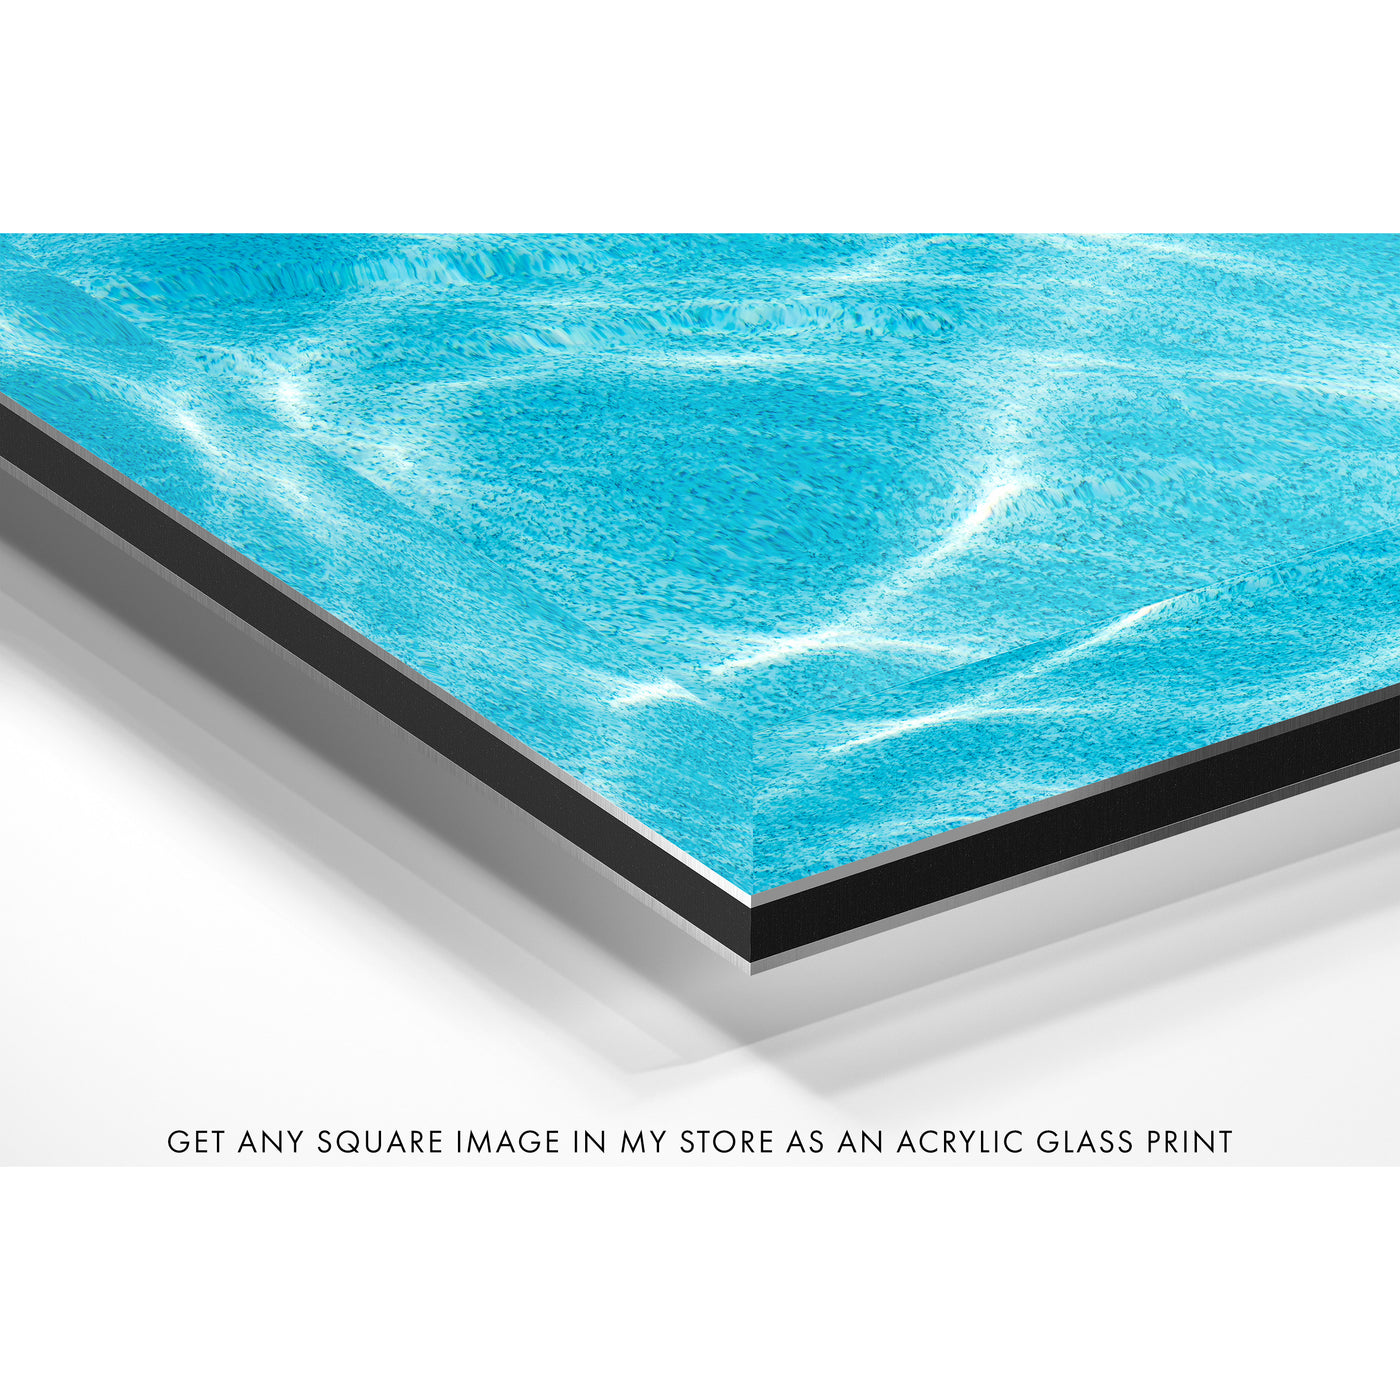 Any Square Image as an Acrylic Glass Print